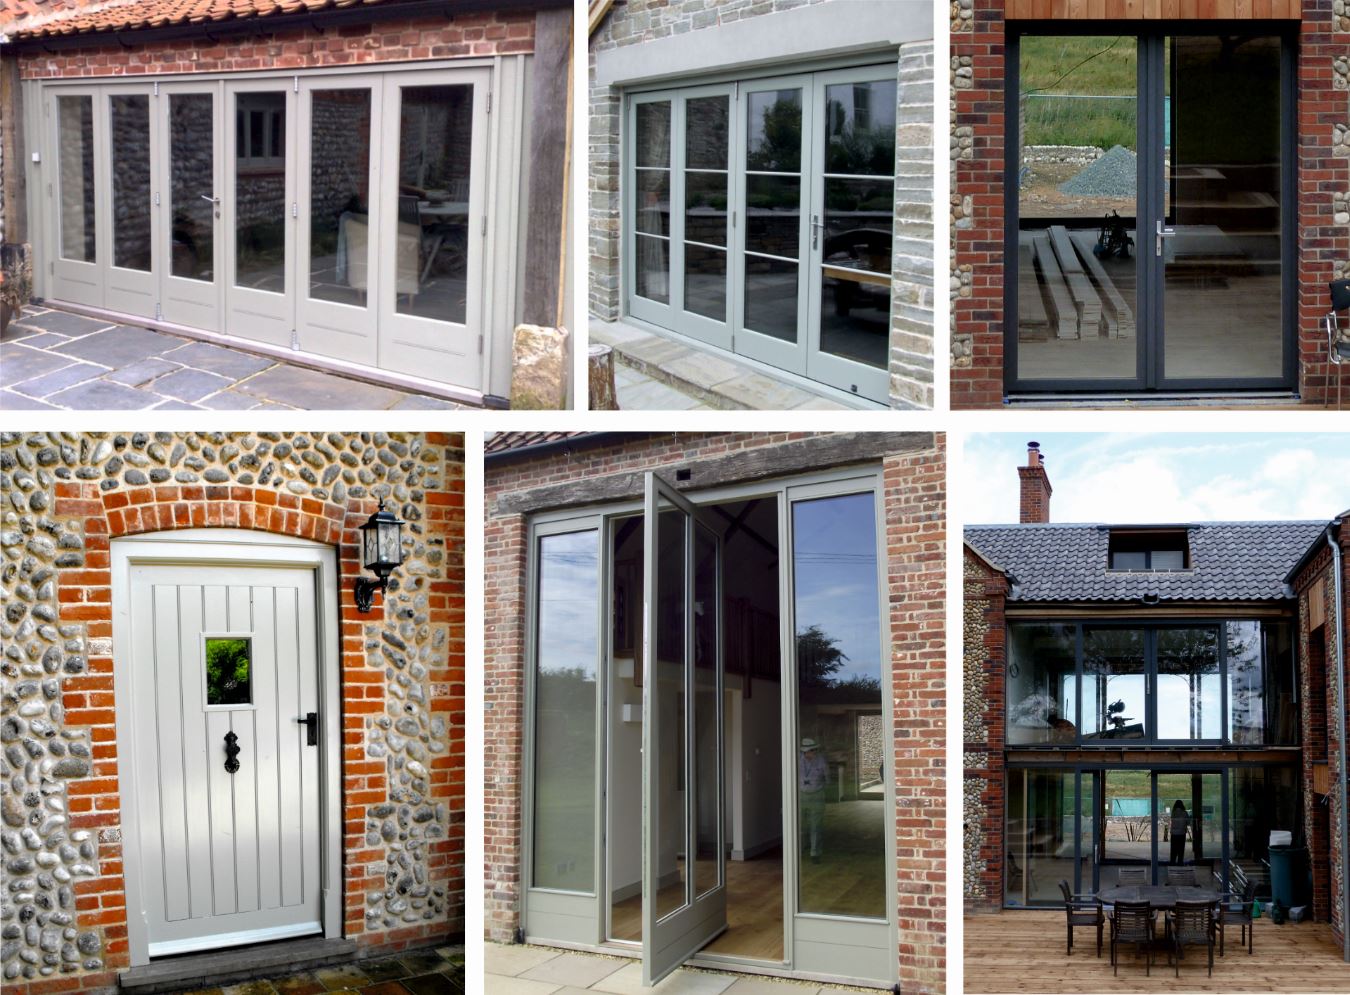 Selection of neo-traditional and contemporary doors